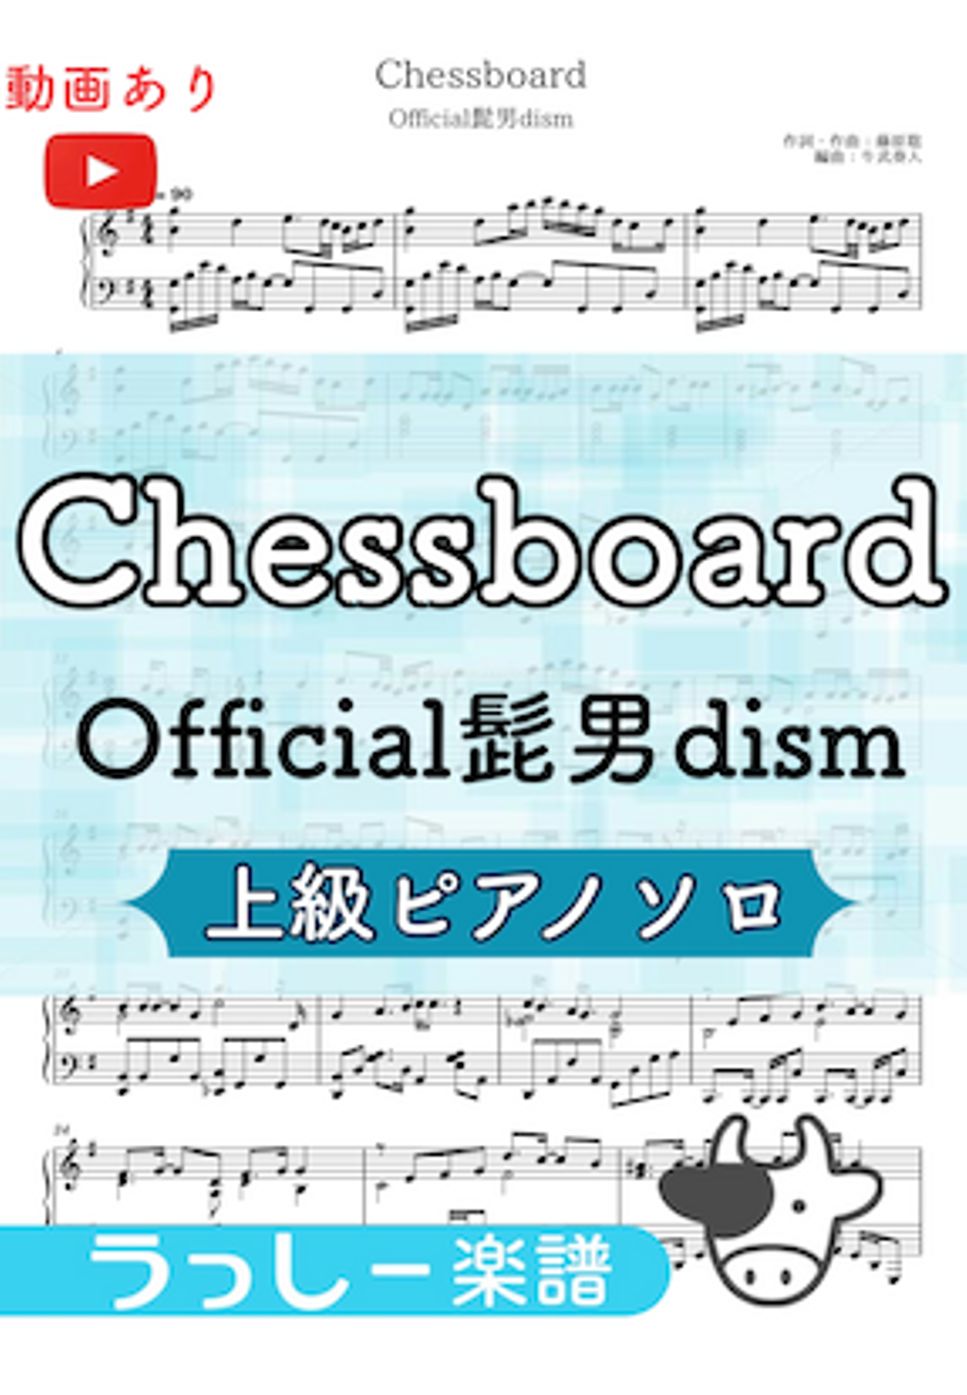 Official髭男dism - Chessboard (ピアノ/上級) by 牛武奏人